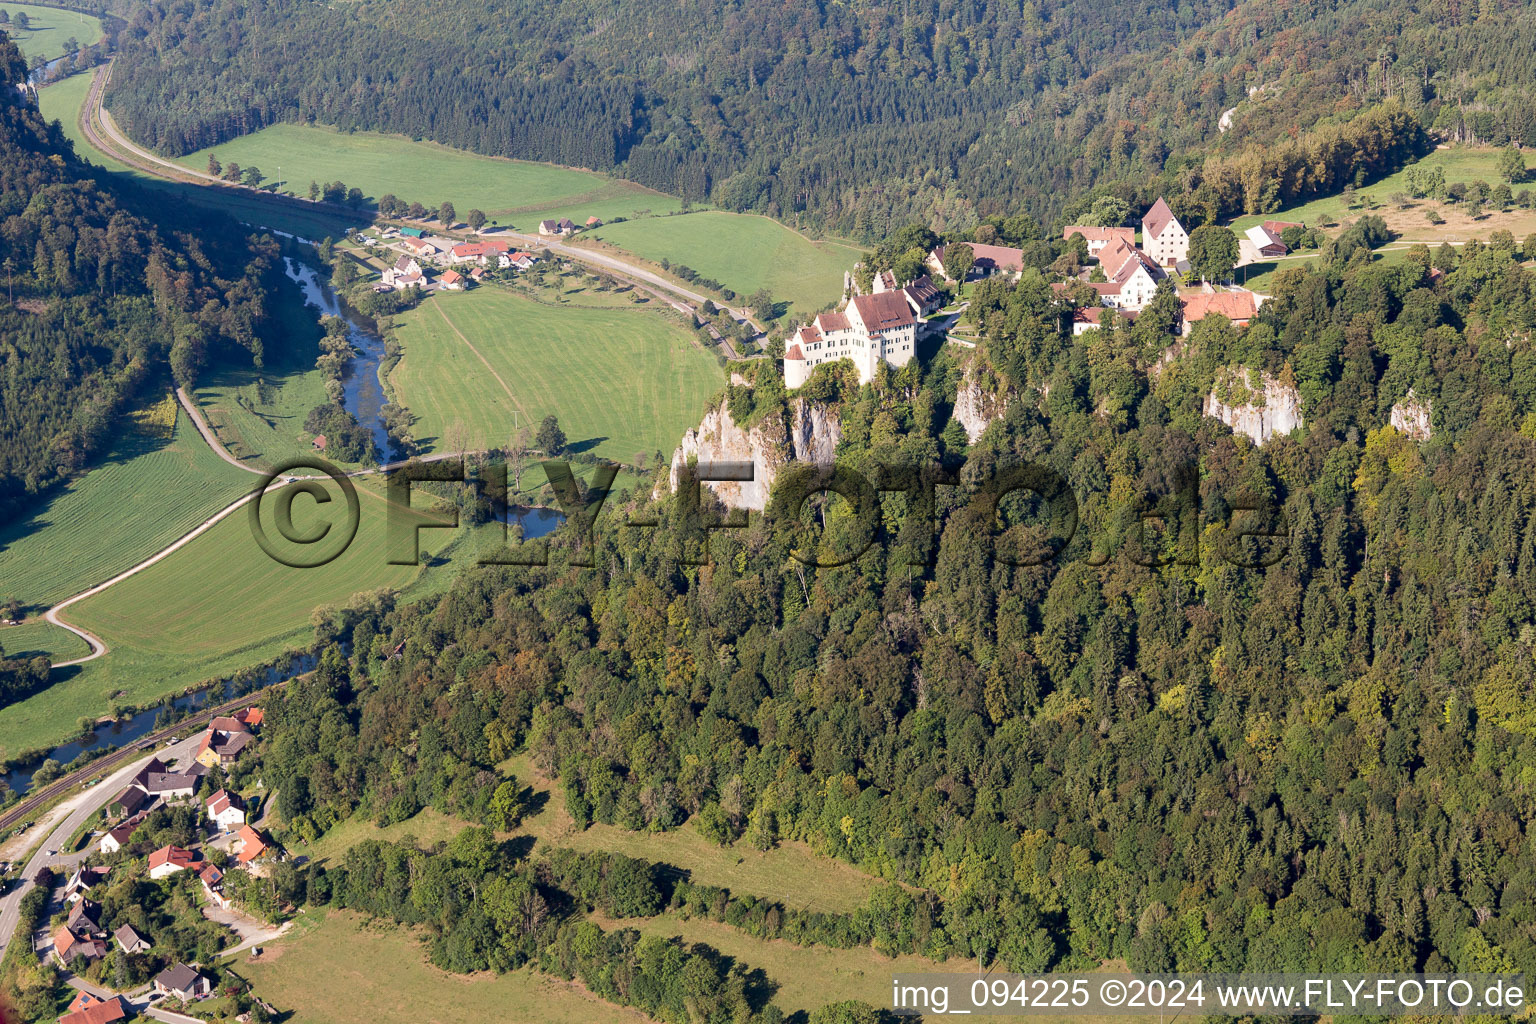 Aerial view of Ruins and vestiges of the former castle and fortress Ruine Schloss Hausen in Tal above the valley of the Danube in Beuron in the state Baden-Wurttemberg, Germany